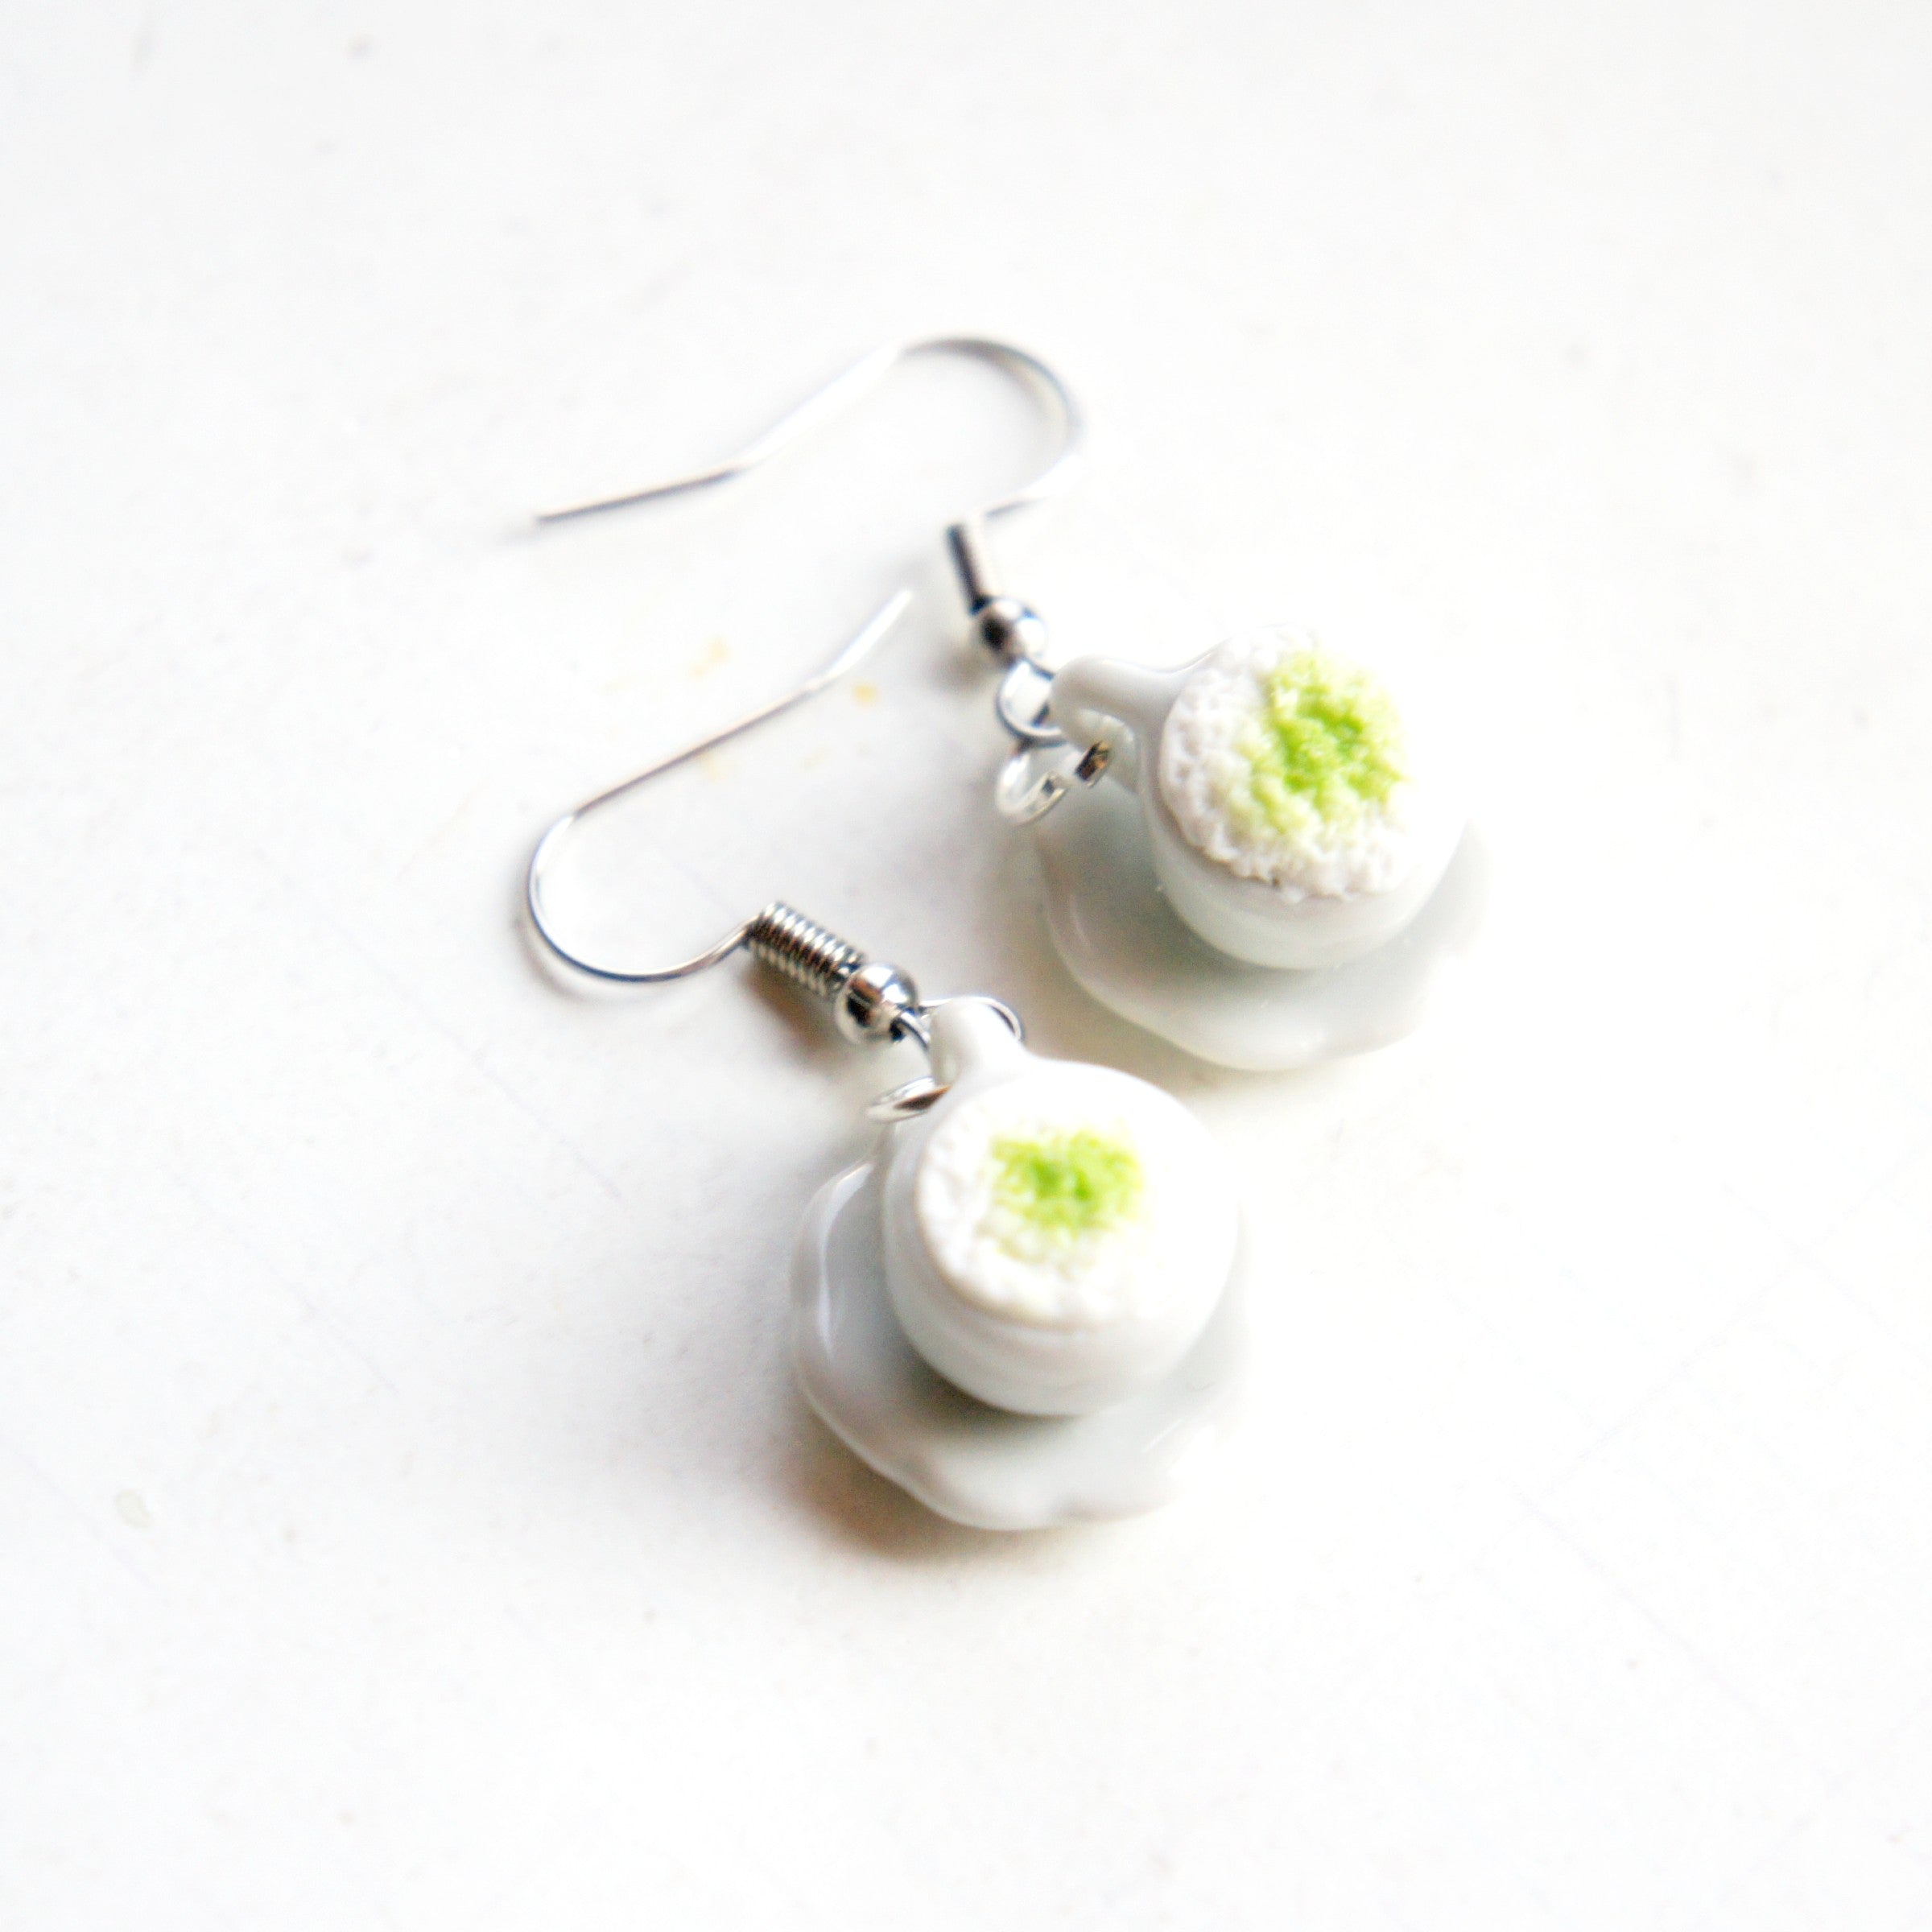 Green Tea Latte Earrings - Jillicious charms and accessories